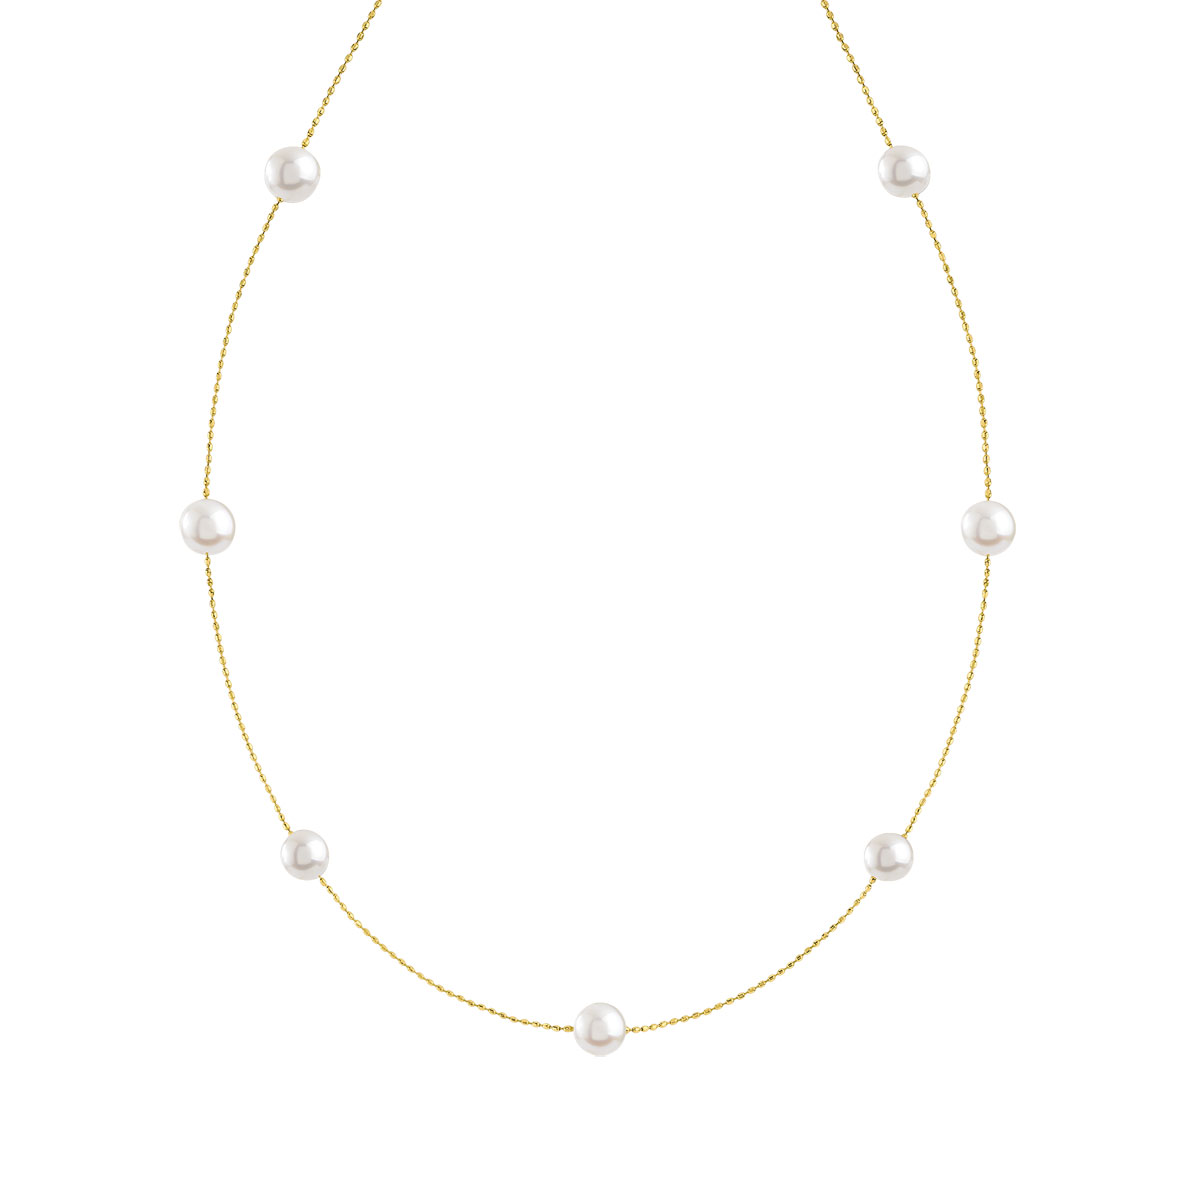 collier femme or perle